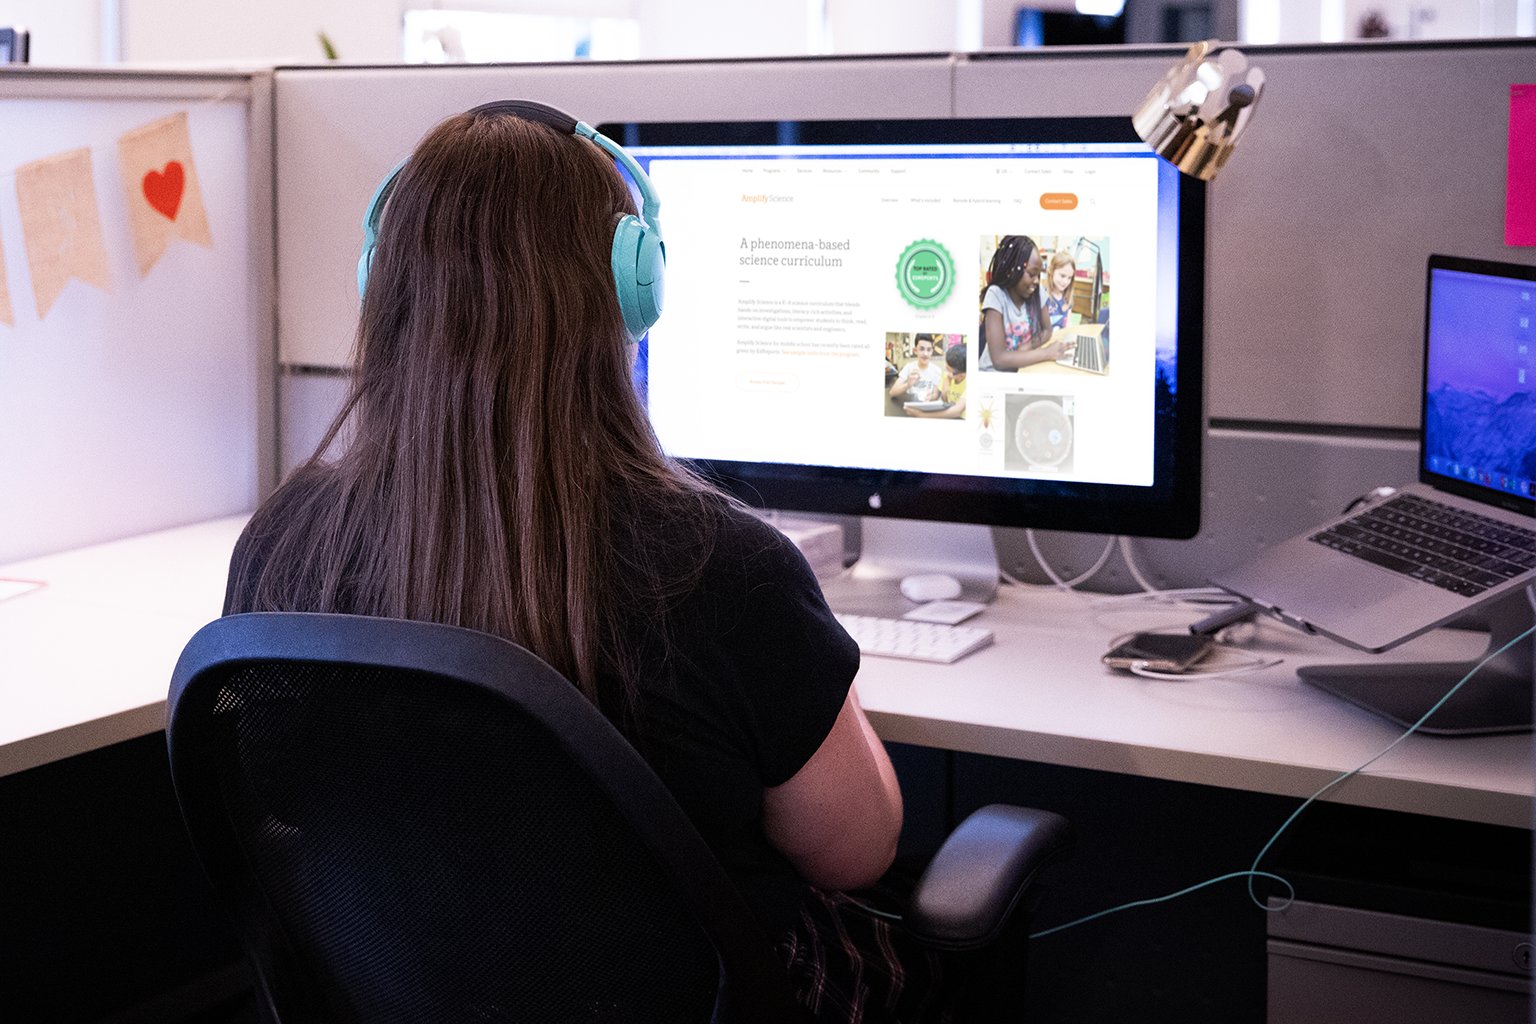 A woman wearing headphones works at a desk with two monitors displaying content-related websites.